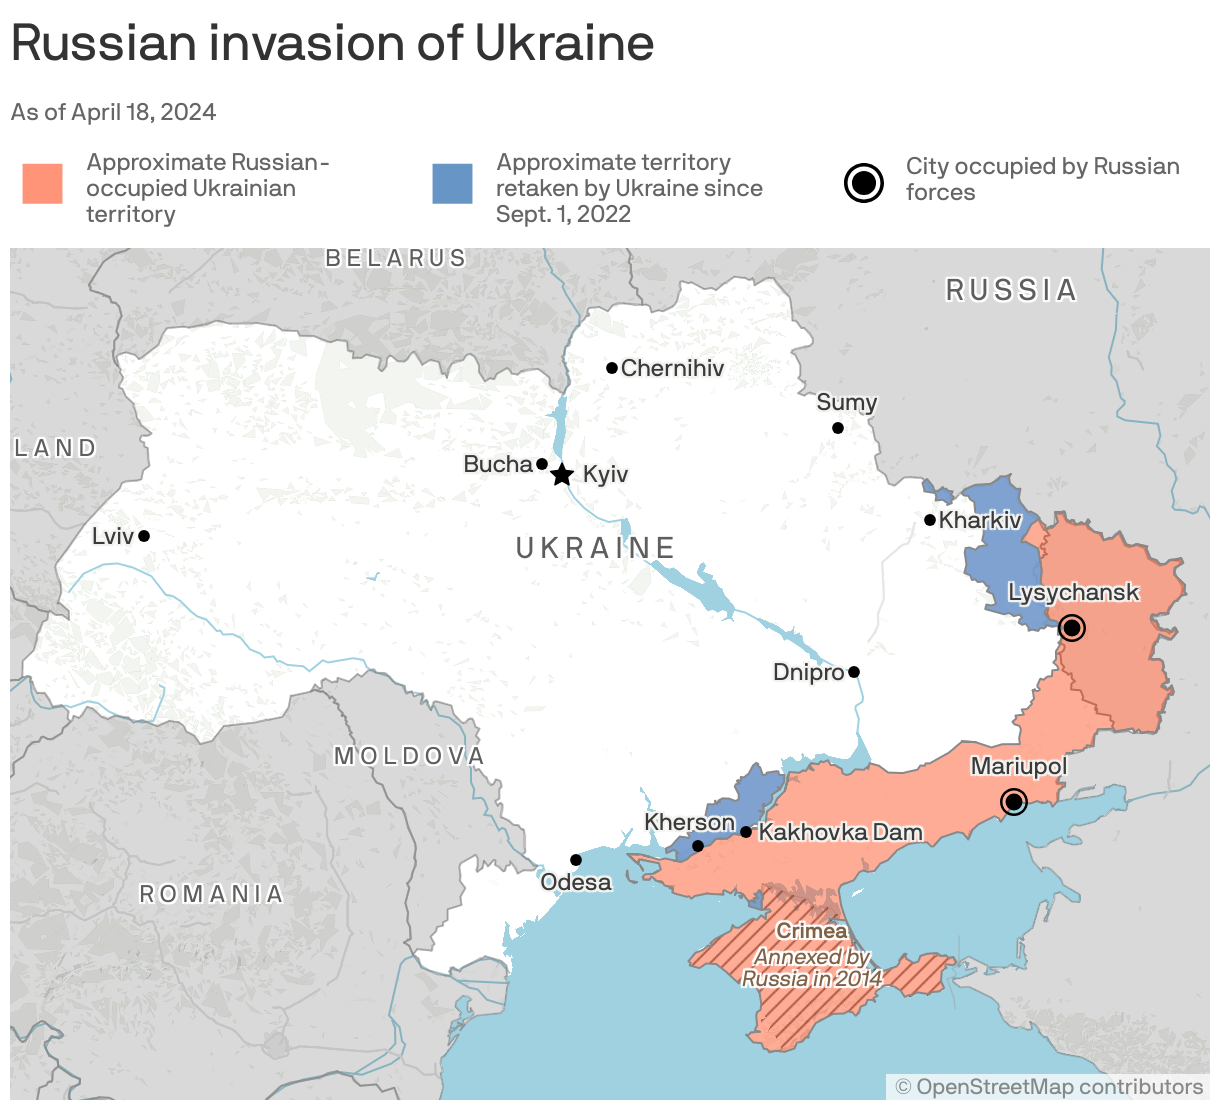 Russian invasion of Ukraine, as of April 8